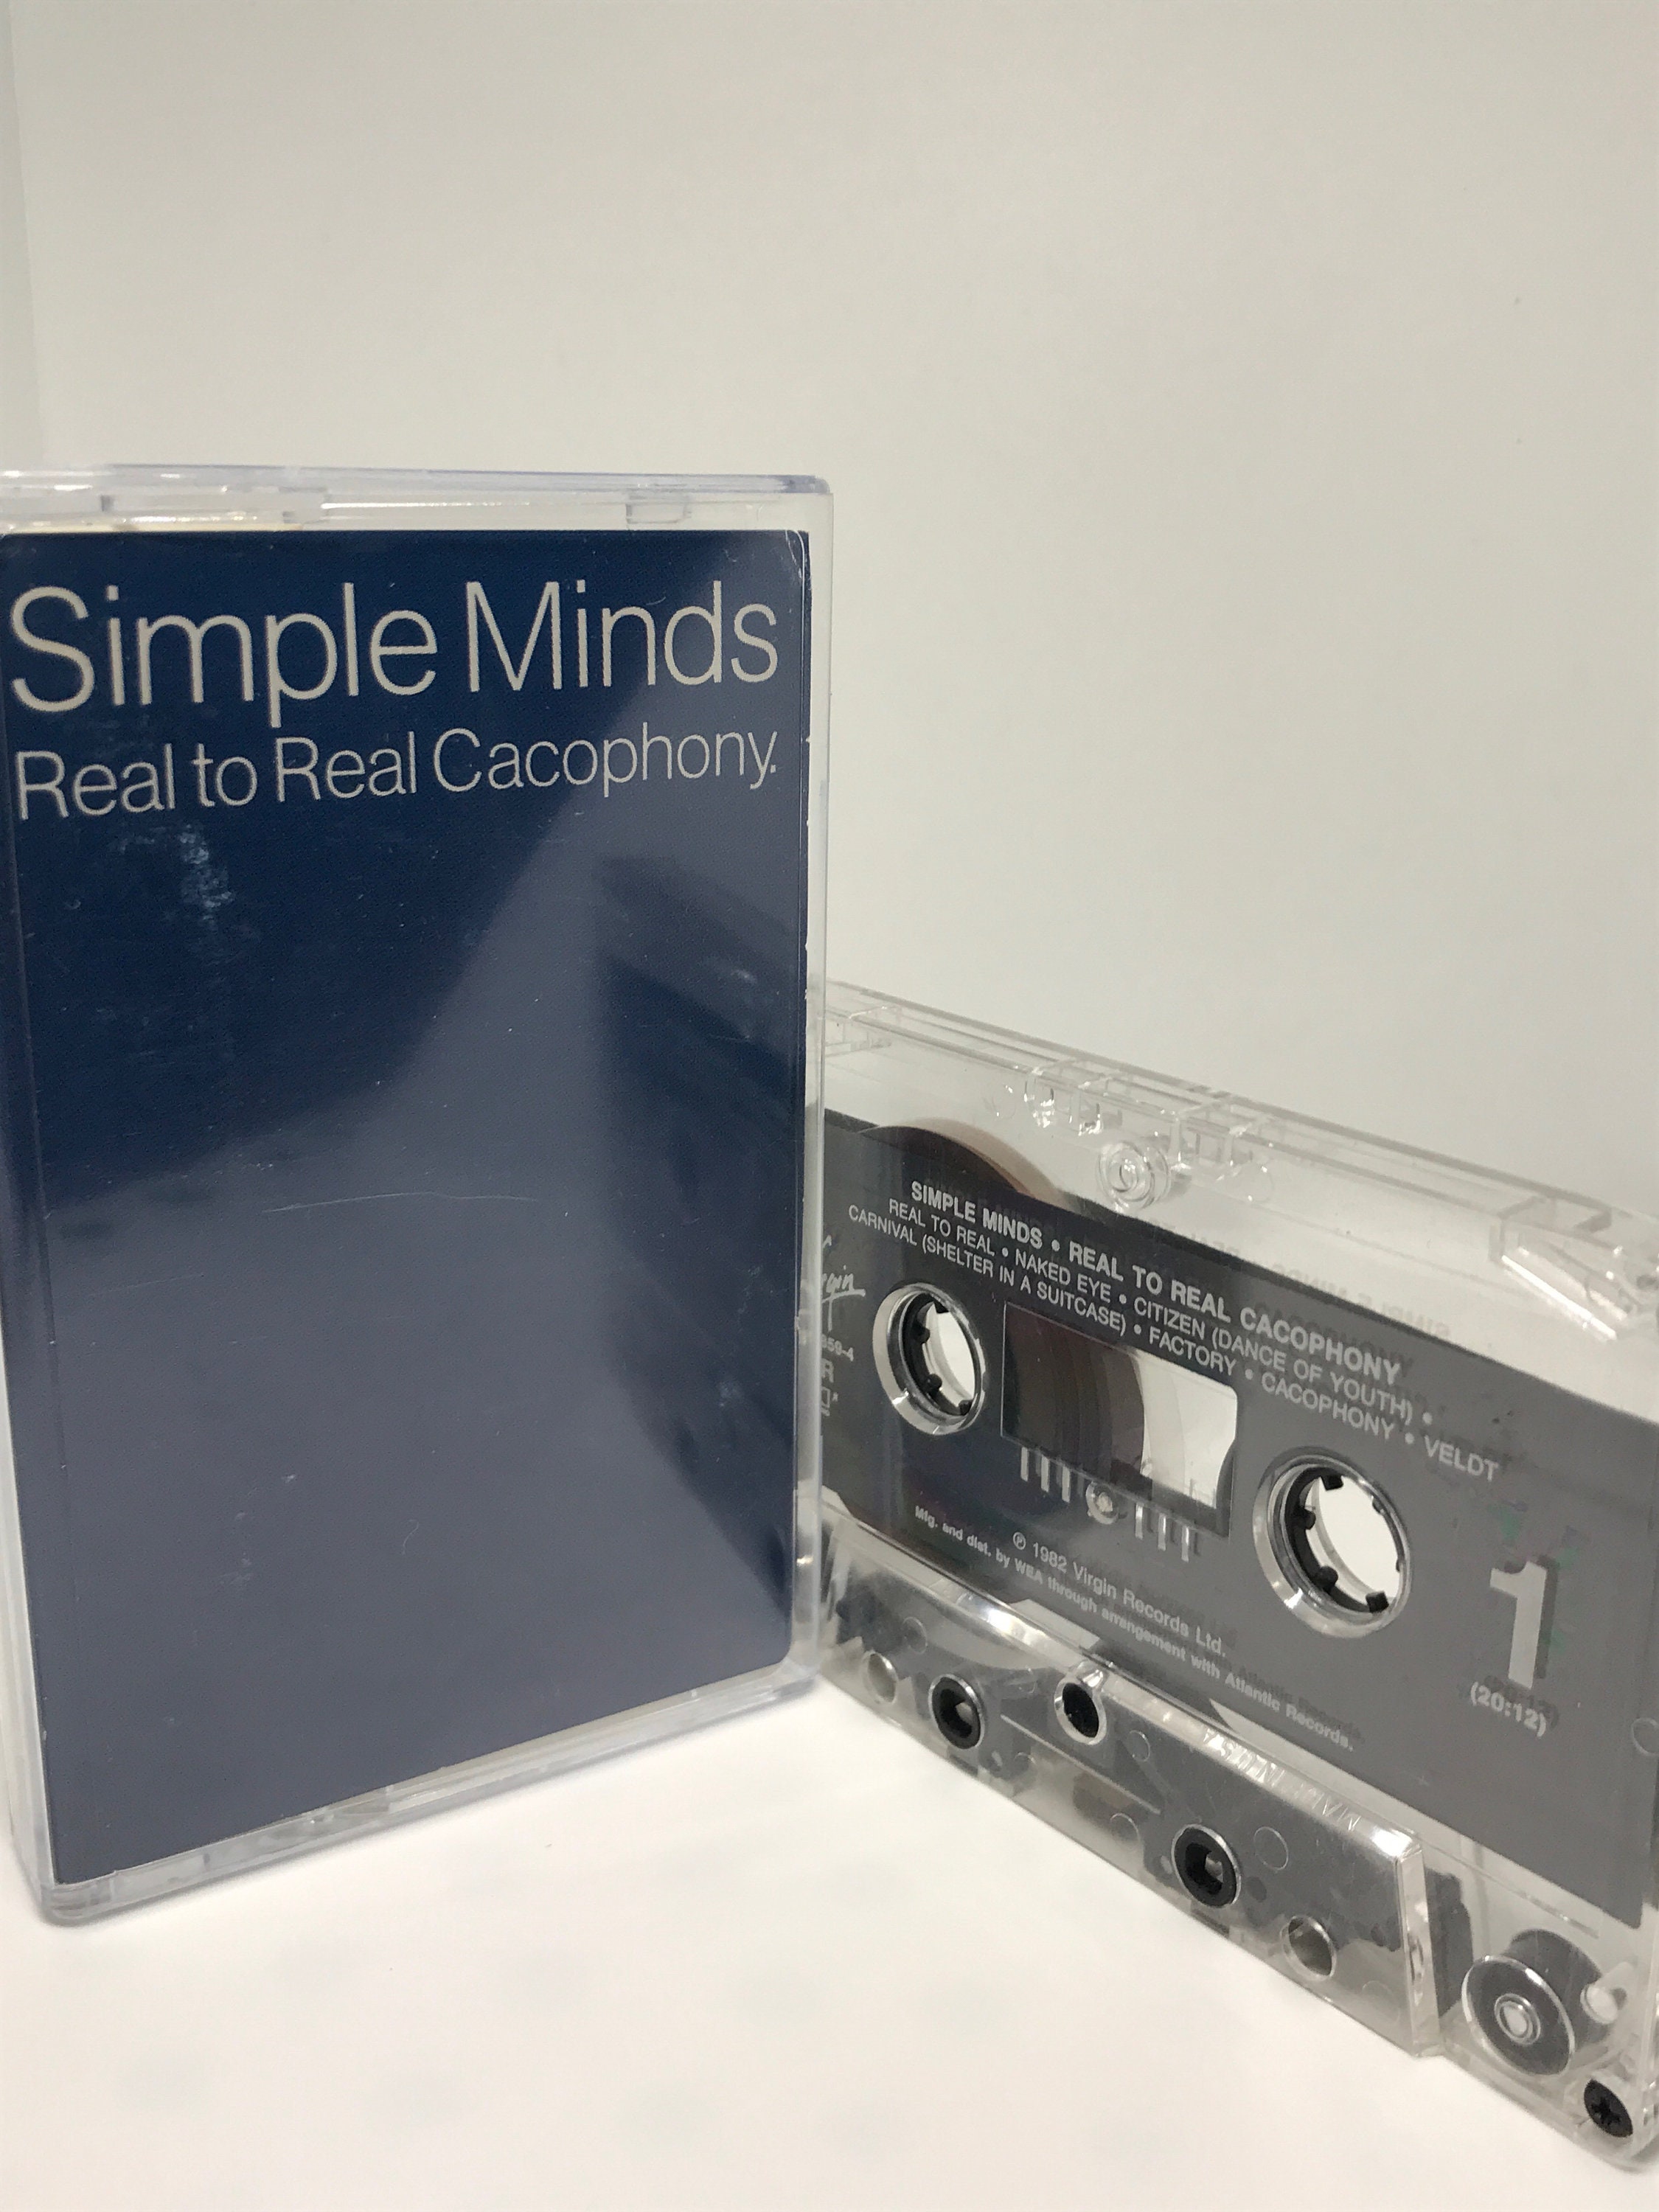 Simple Minds Real to Real Cacophony -  Canada